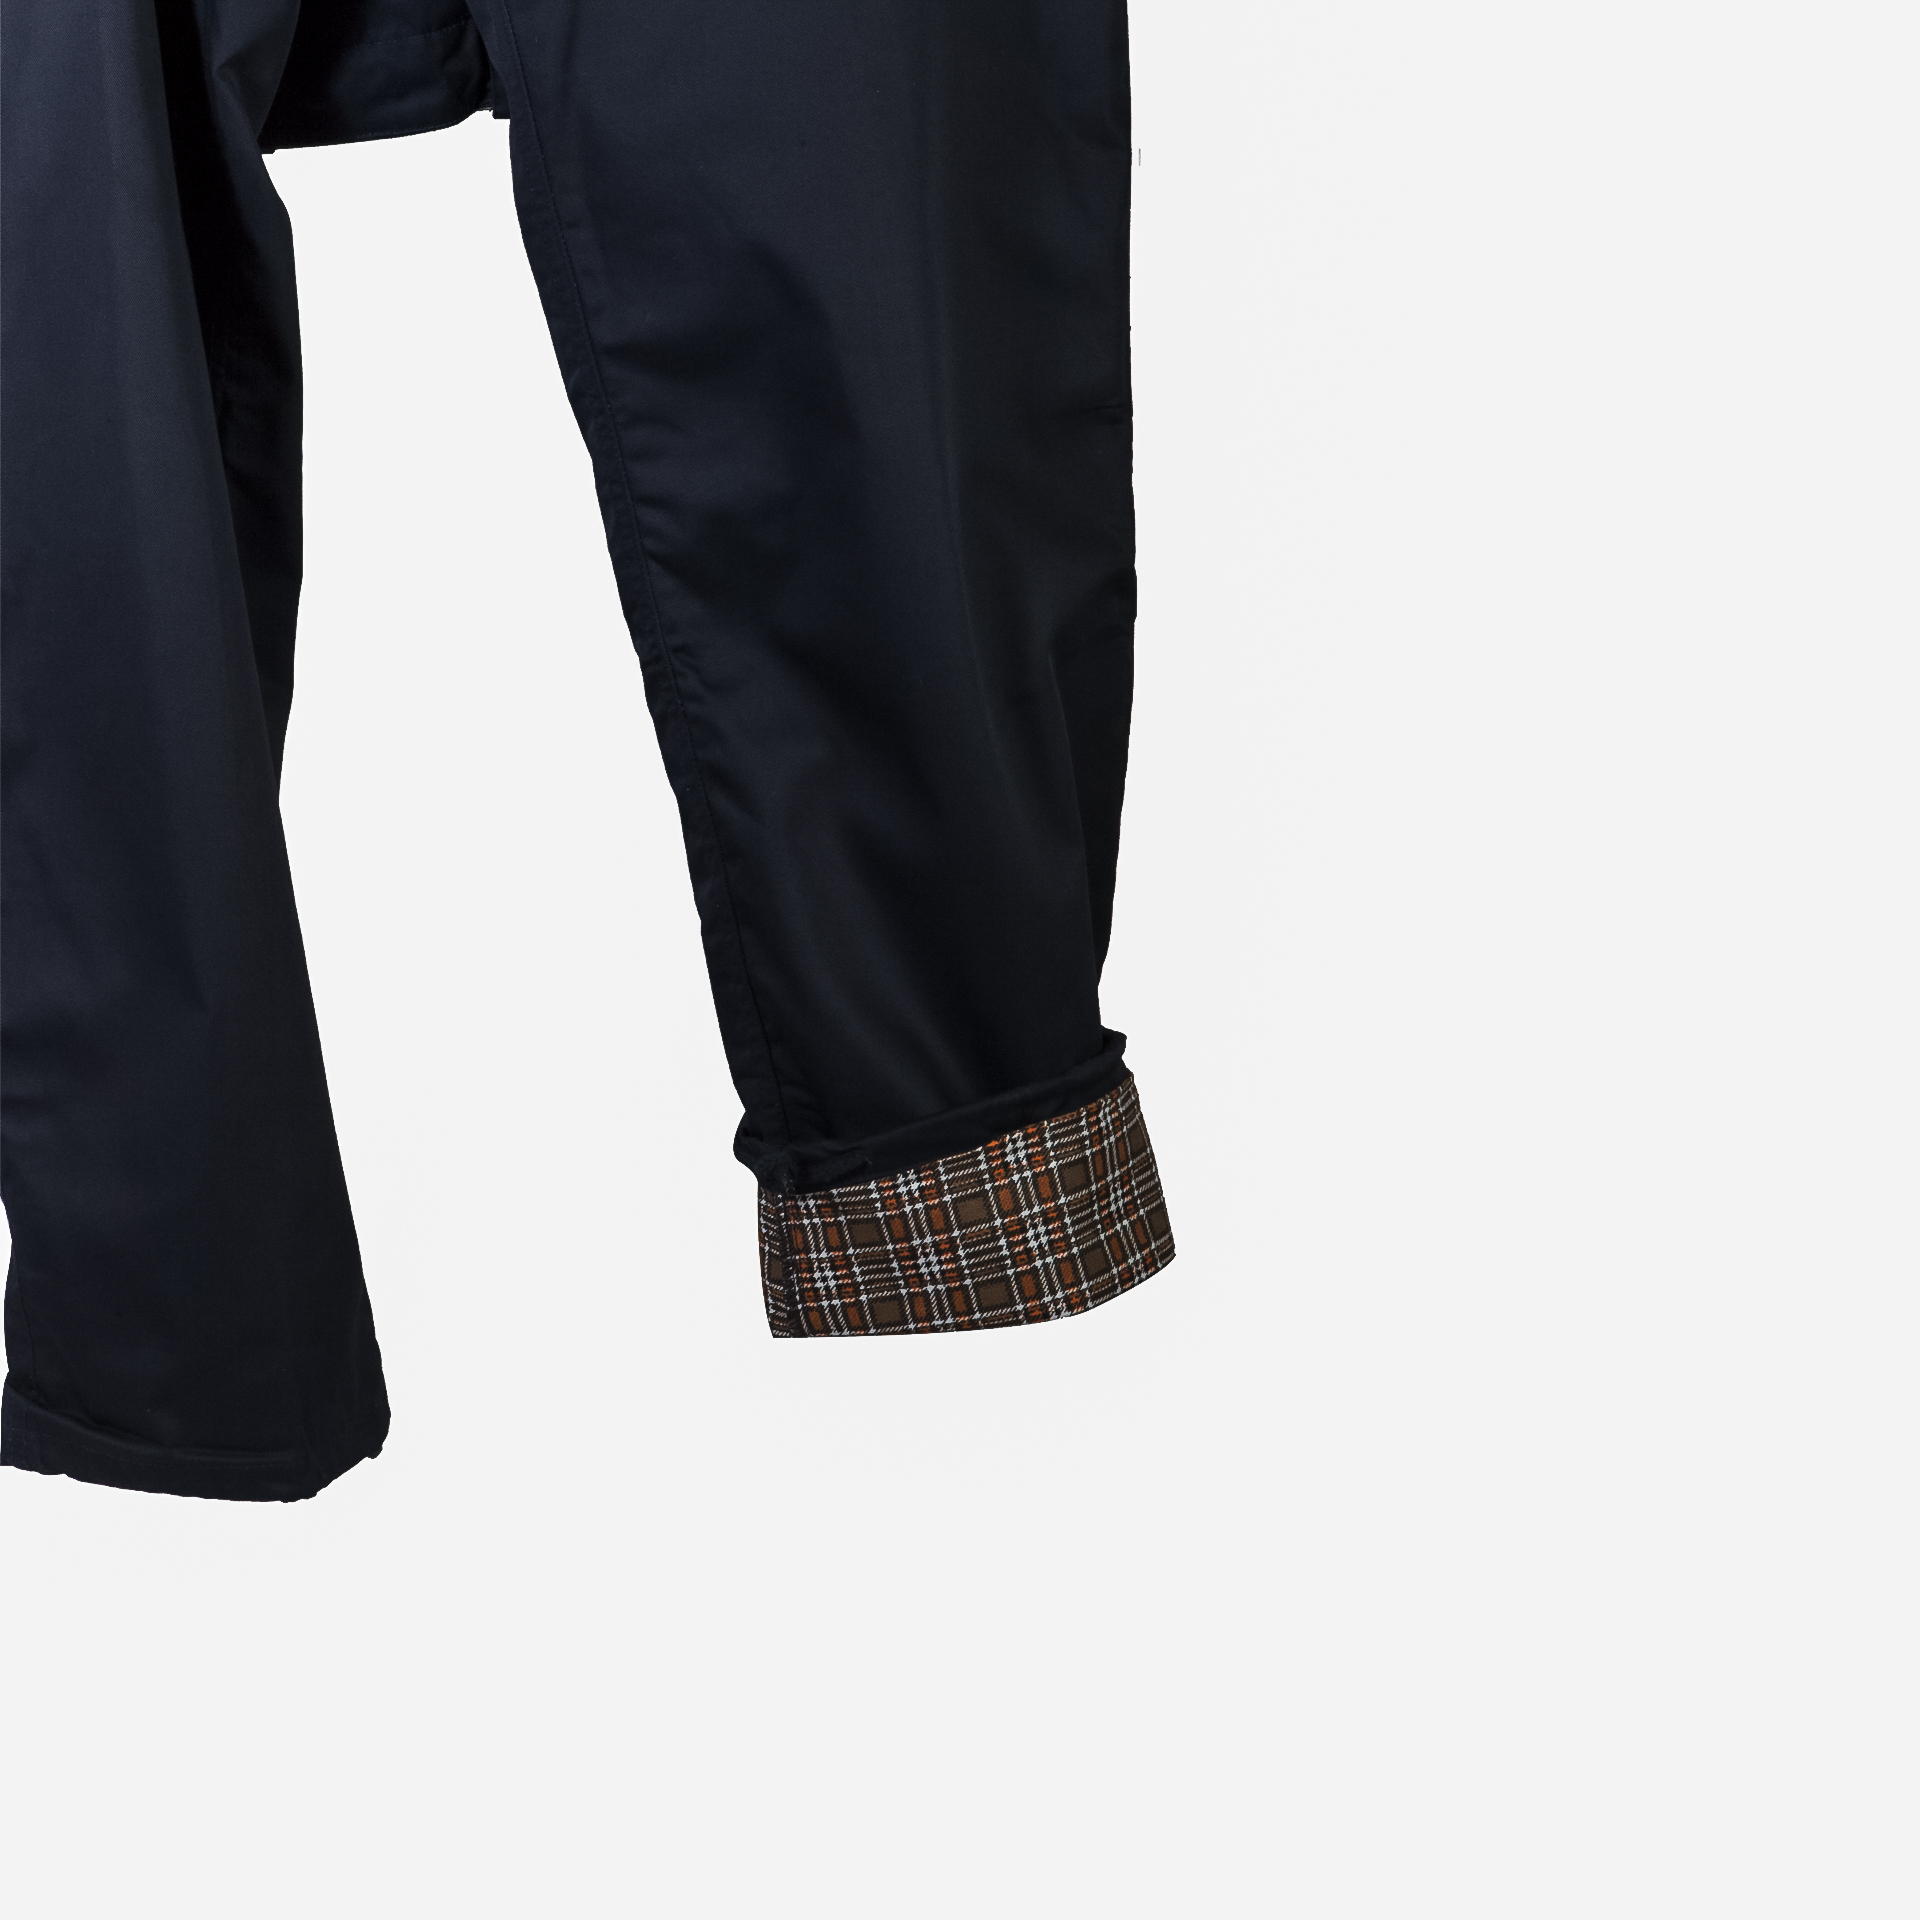 pantalone-neri-army-invernale-437053-blu-navy-particolare.png